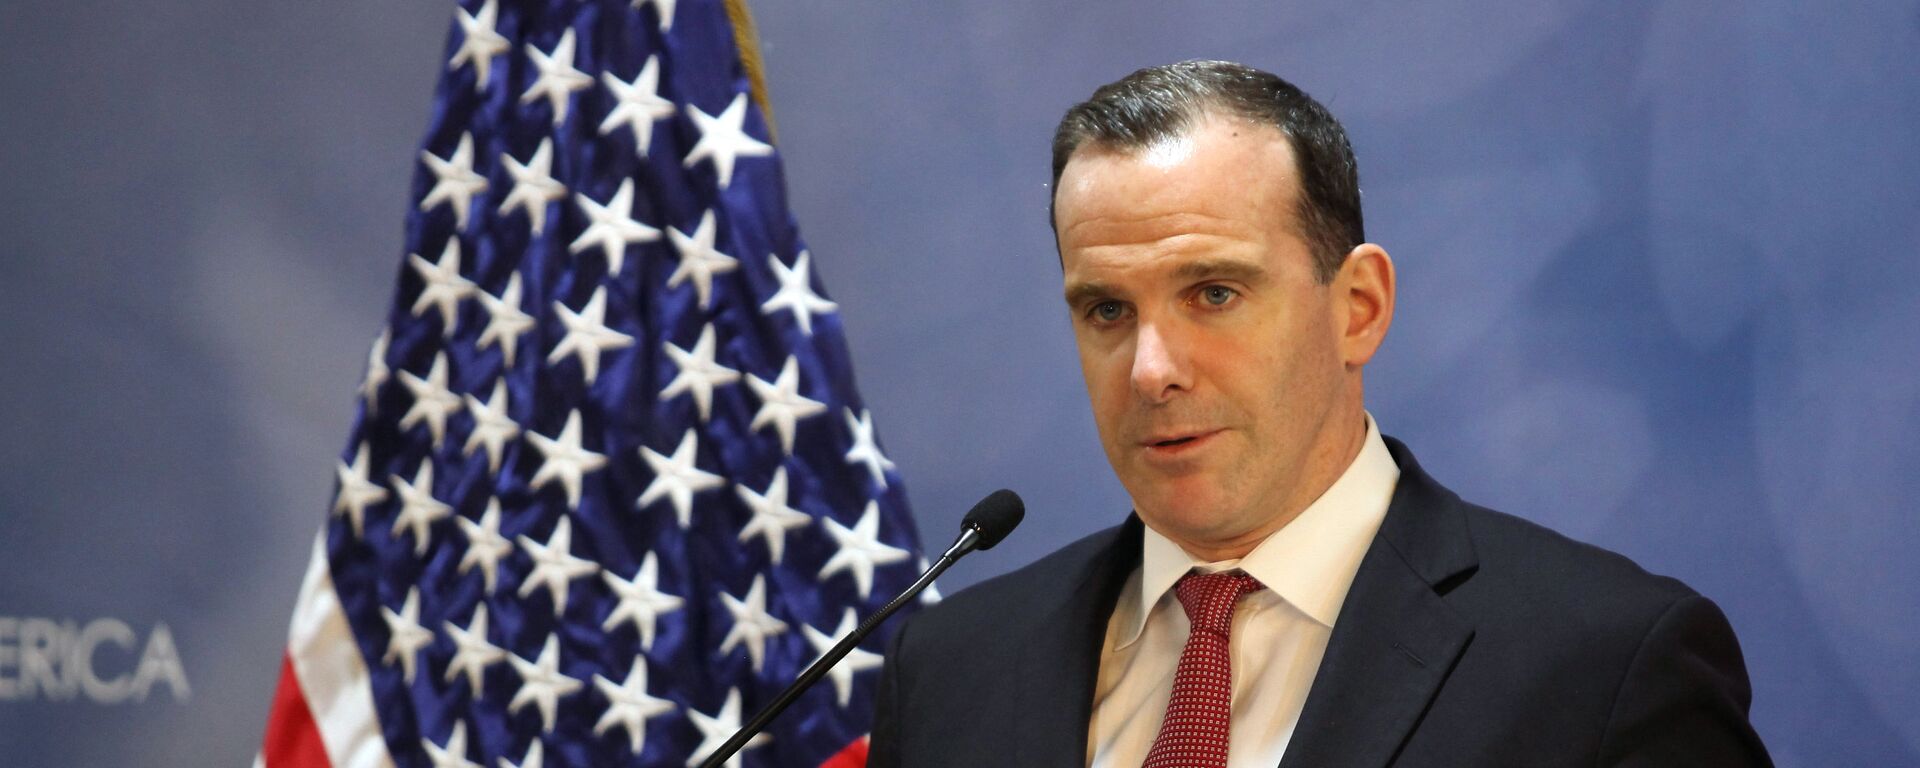 Special Presidential Envoy for the Global Coalition to Counter ISIL, Brett McGurk, speaks during a press conference in Amman on November 6, 2016.  - Sputnik International, 1920, 27.07.2022